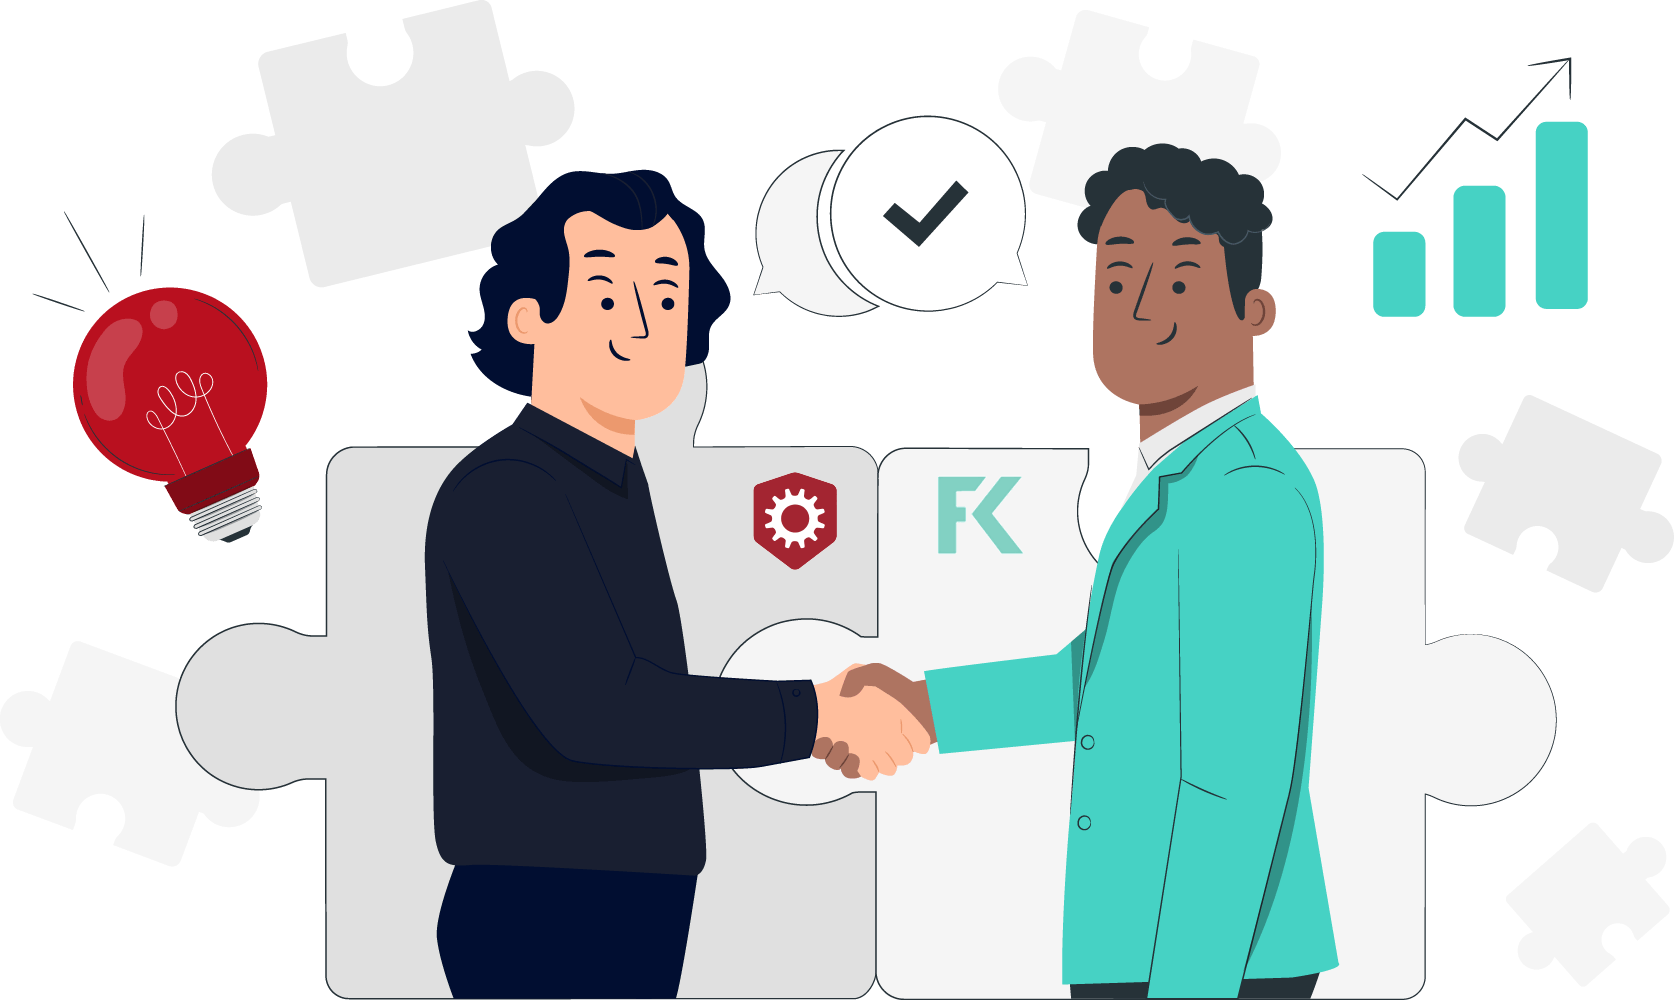 PrivacyEngine and filerskeepers partner to provide instant access to retention information across hundreds of countries